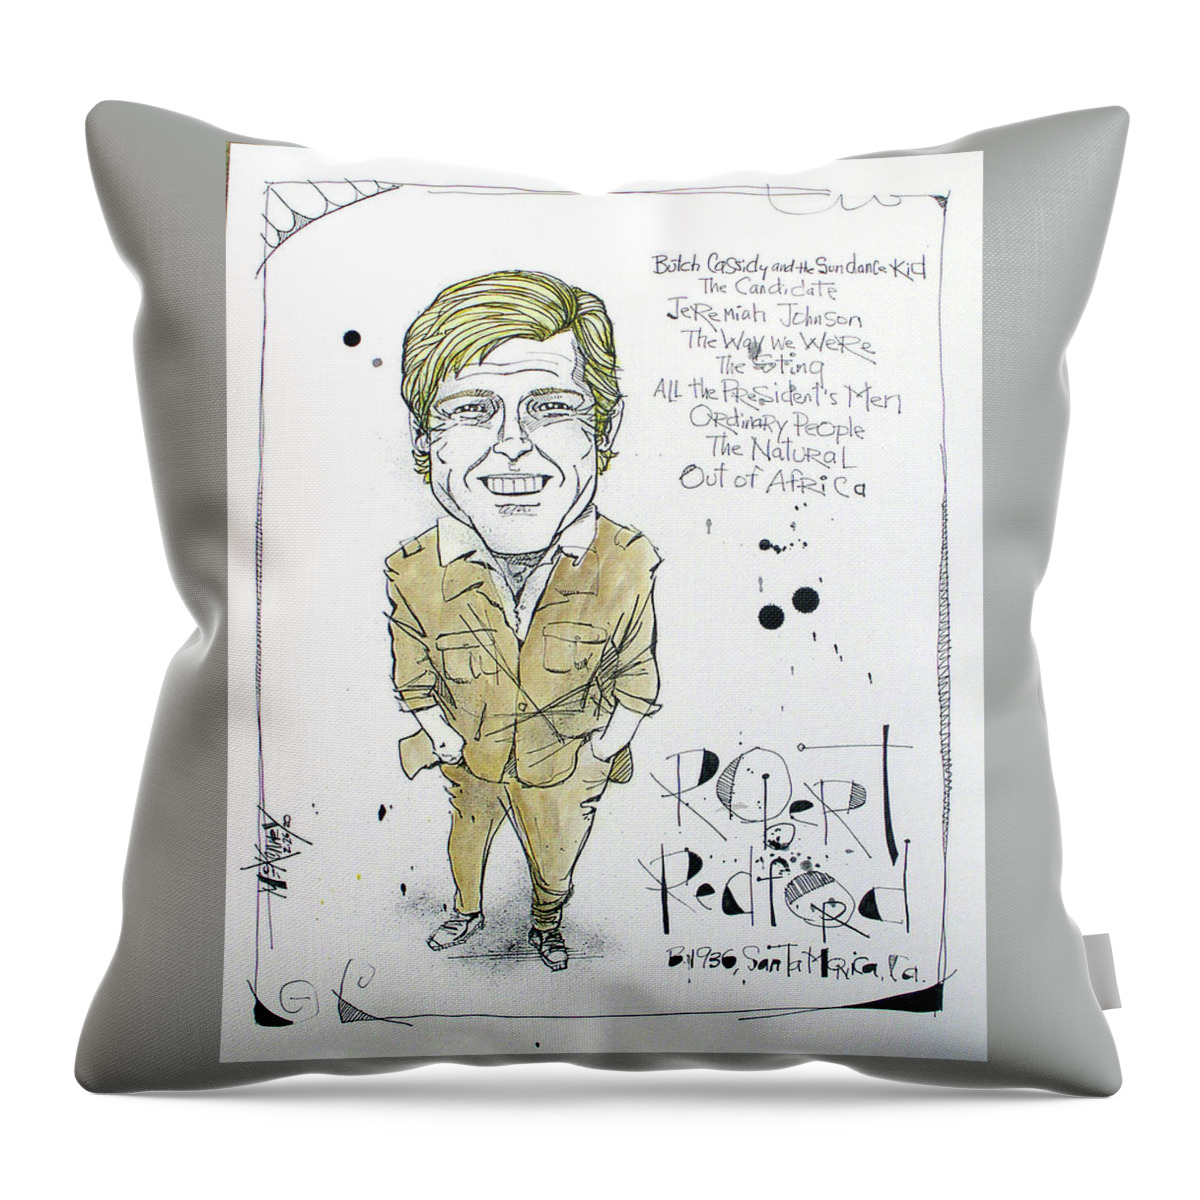  Throw Pillow featuring the drawing Robert Redford by Phil Mckenney